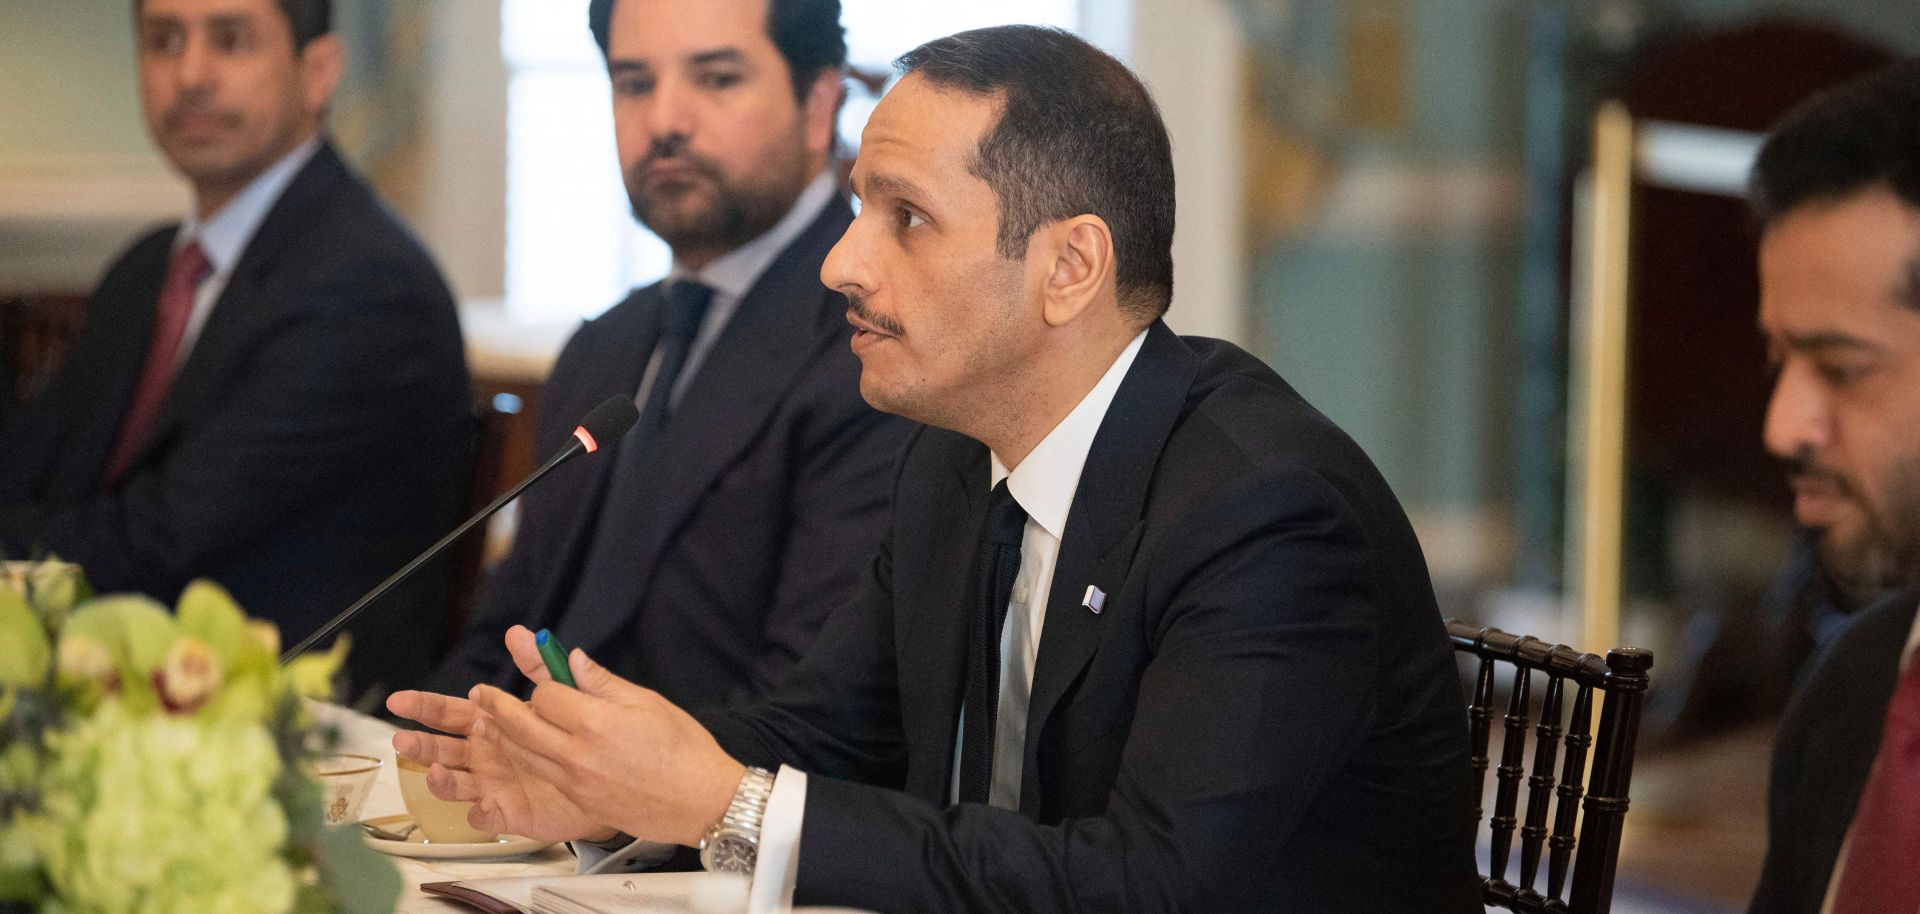 Qatar's then deputy prime minister and foreign minister, Mohammed bin Abdulrahman Al Thani (center), speaks during a meeting with U.S. Secretary of State Antony Blinken, in Washington D.C. on Feb. 10, 2023. 